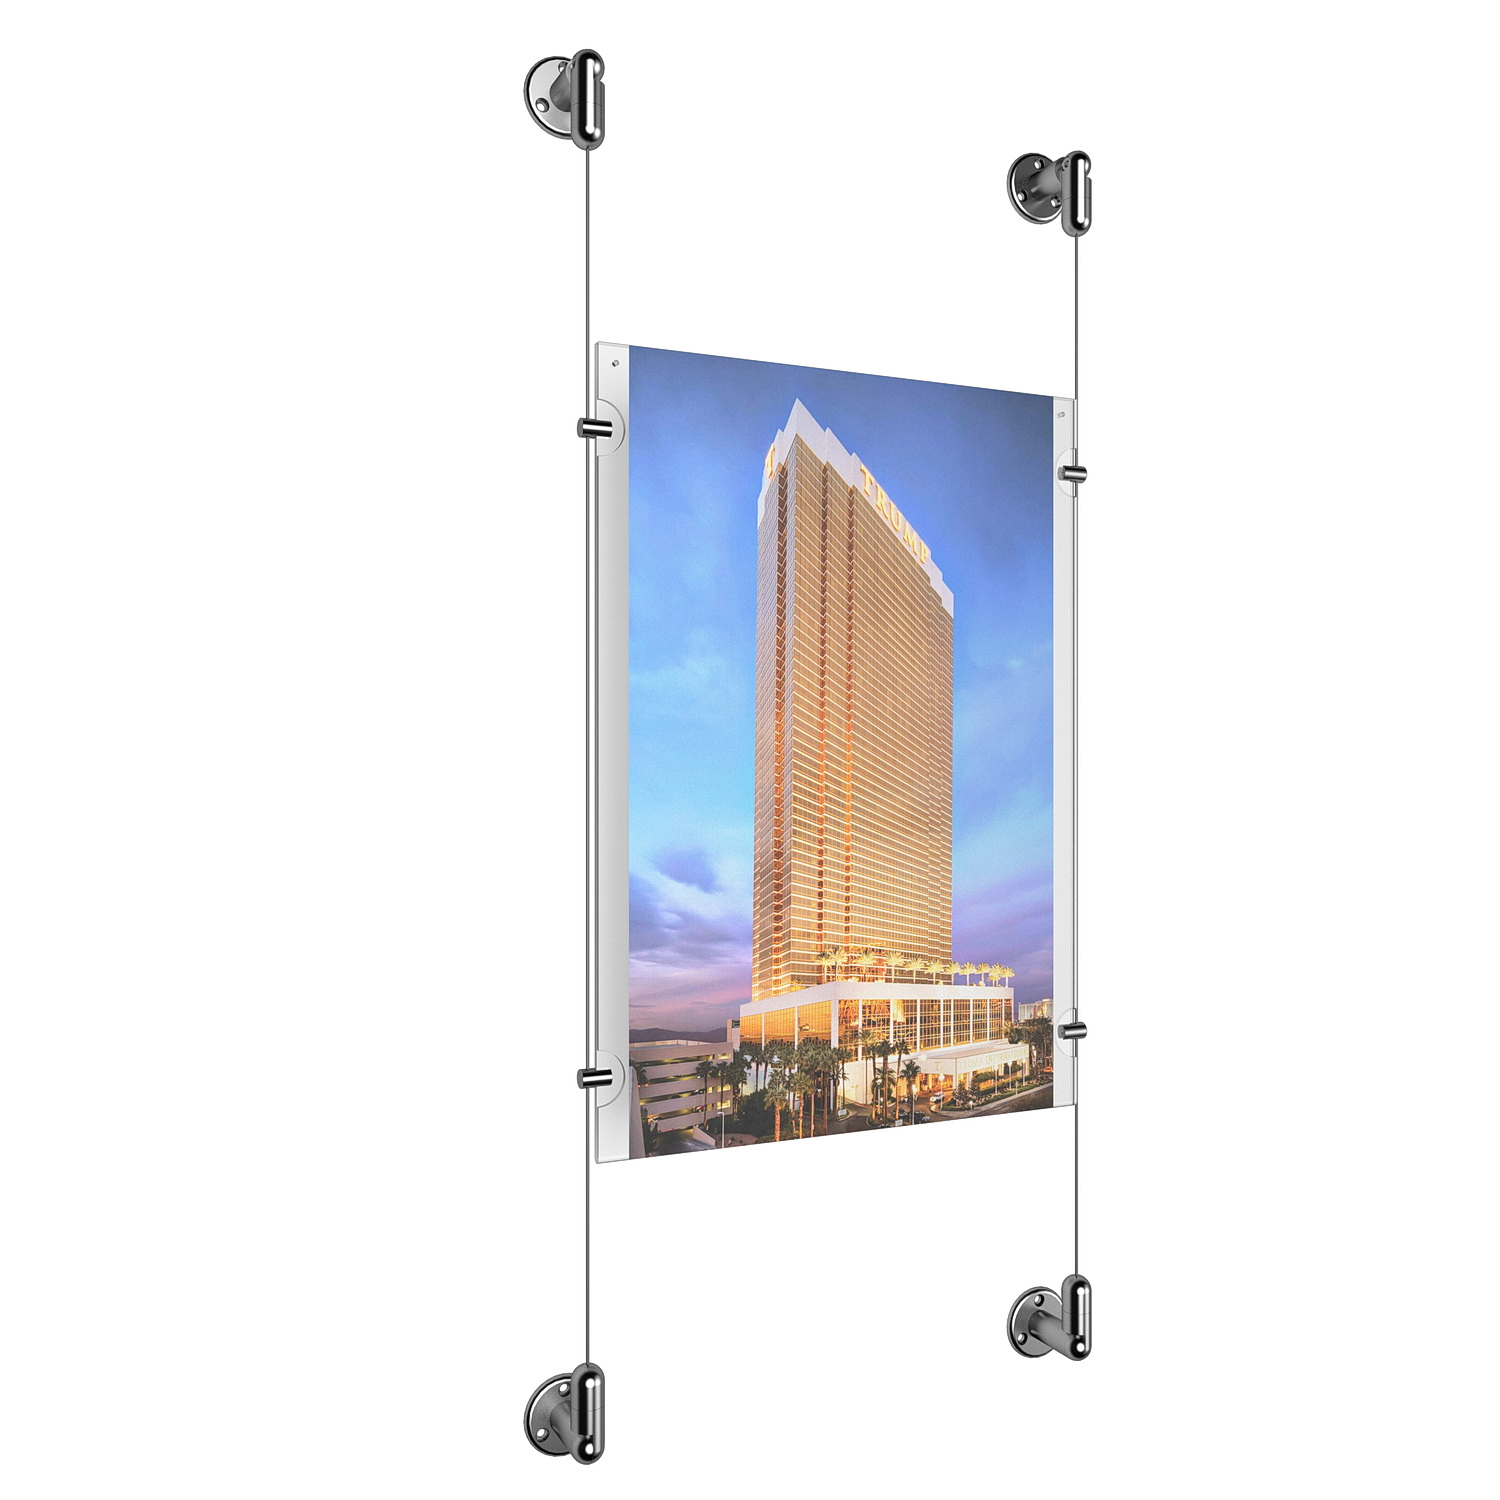 (1) 11'' Width x 17'' Height Clear Acrylic Frame & (2) Aluminum Clear Anodized Adjustable Angle Cable Systems with (4) Single-Sided Panel Grippers